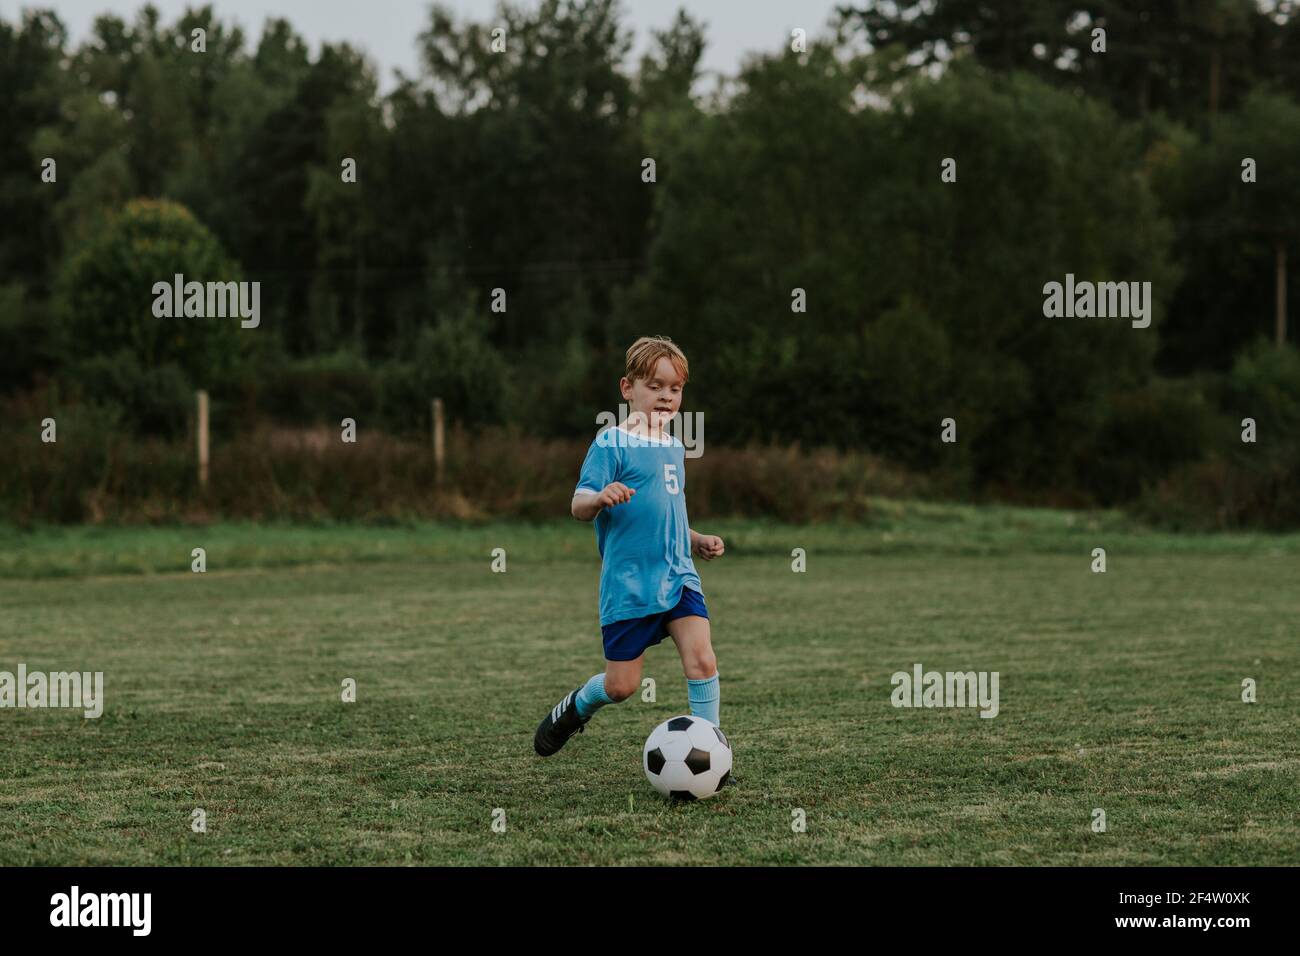 Child soccer player with ball. Boy in blue football dress running after ball on field outside. Stock Photo